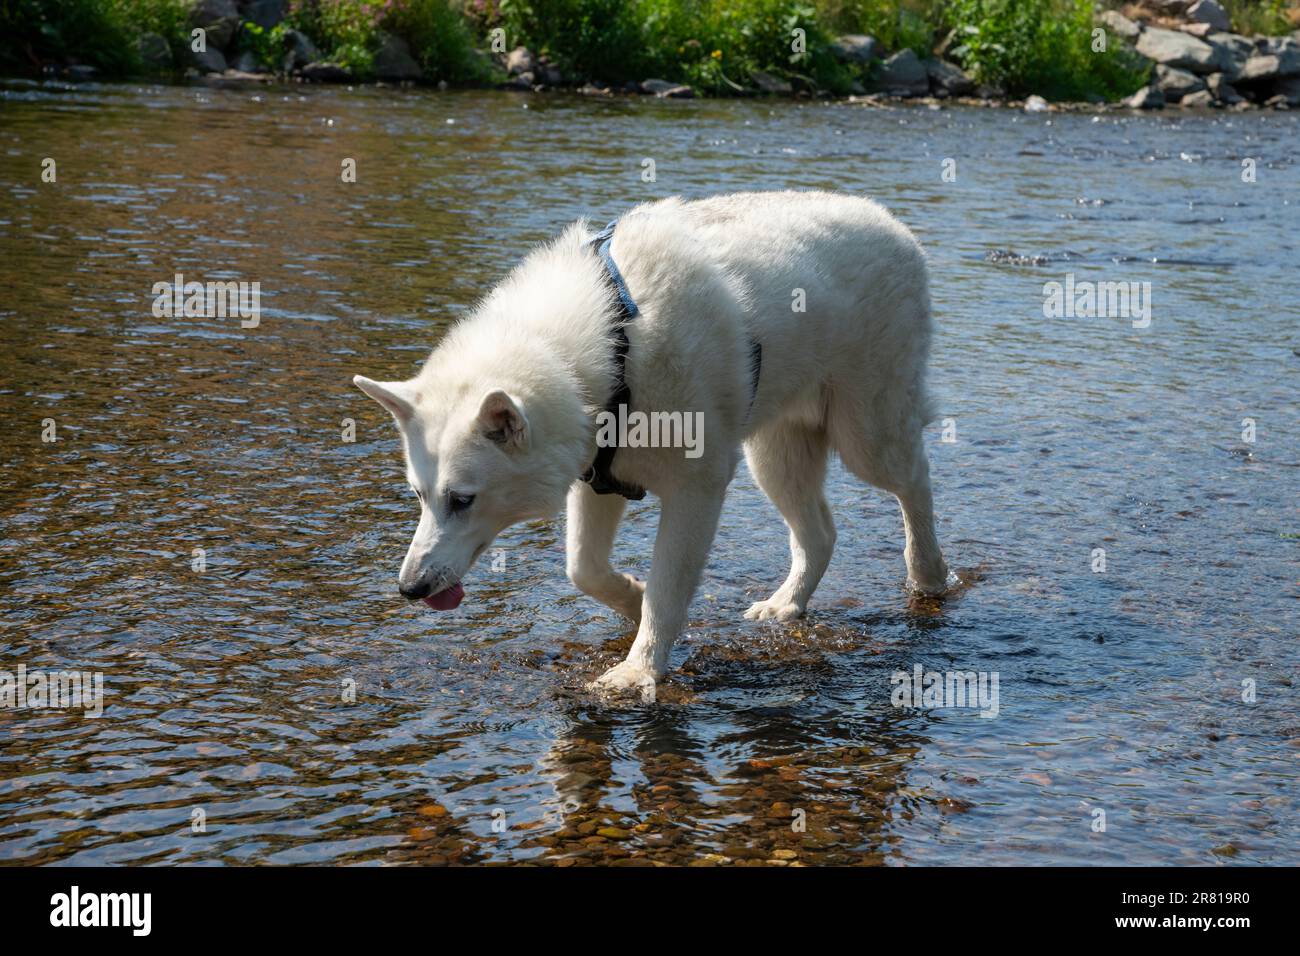 White Siberian Husky paddling nel parco di campagna del fiume rosso vale, Stockport, Greater Manchester, Inghilterra. Foto Stock